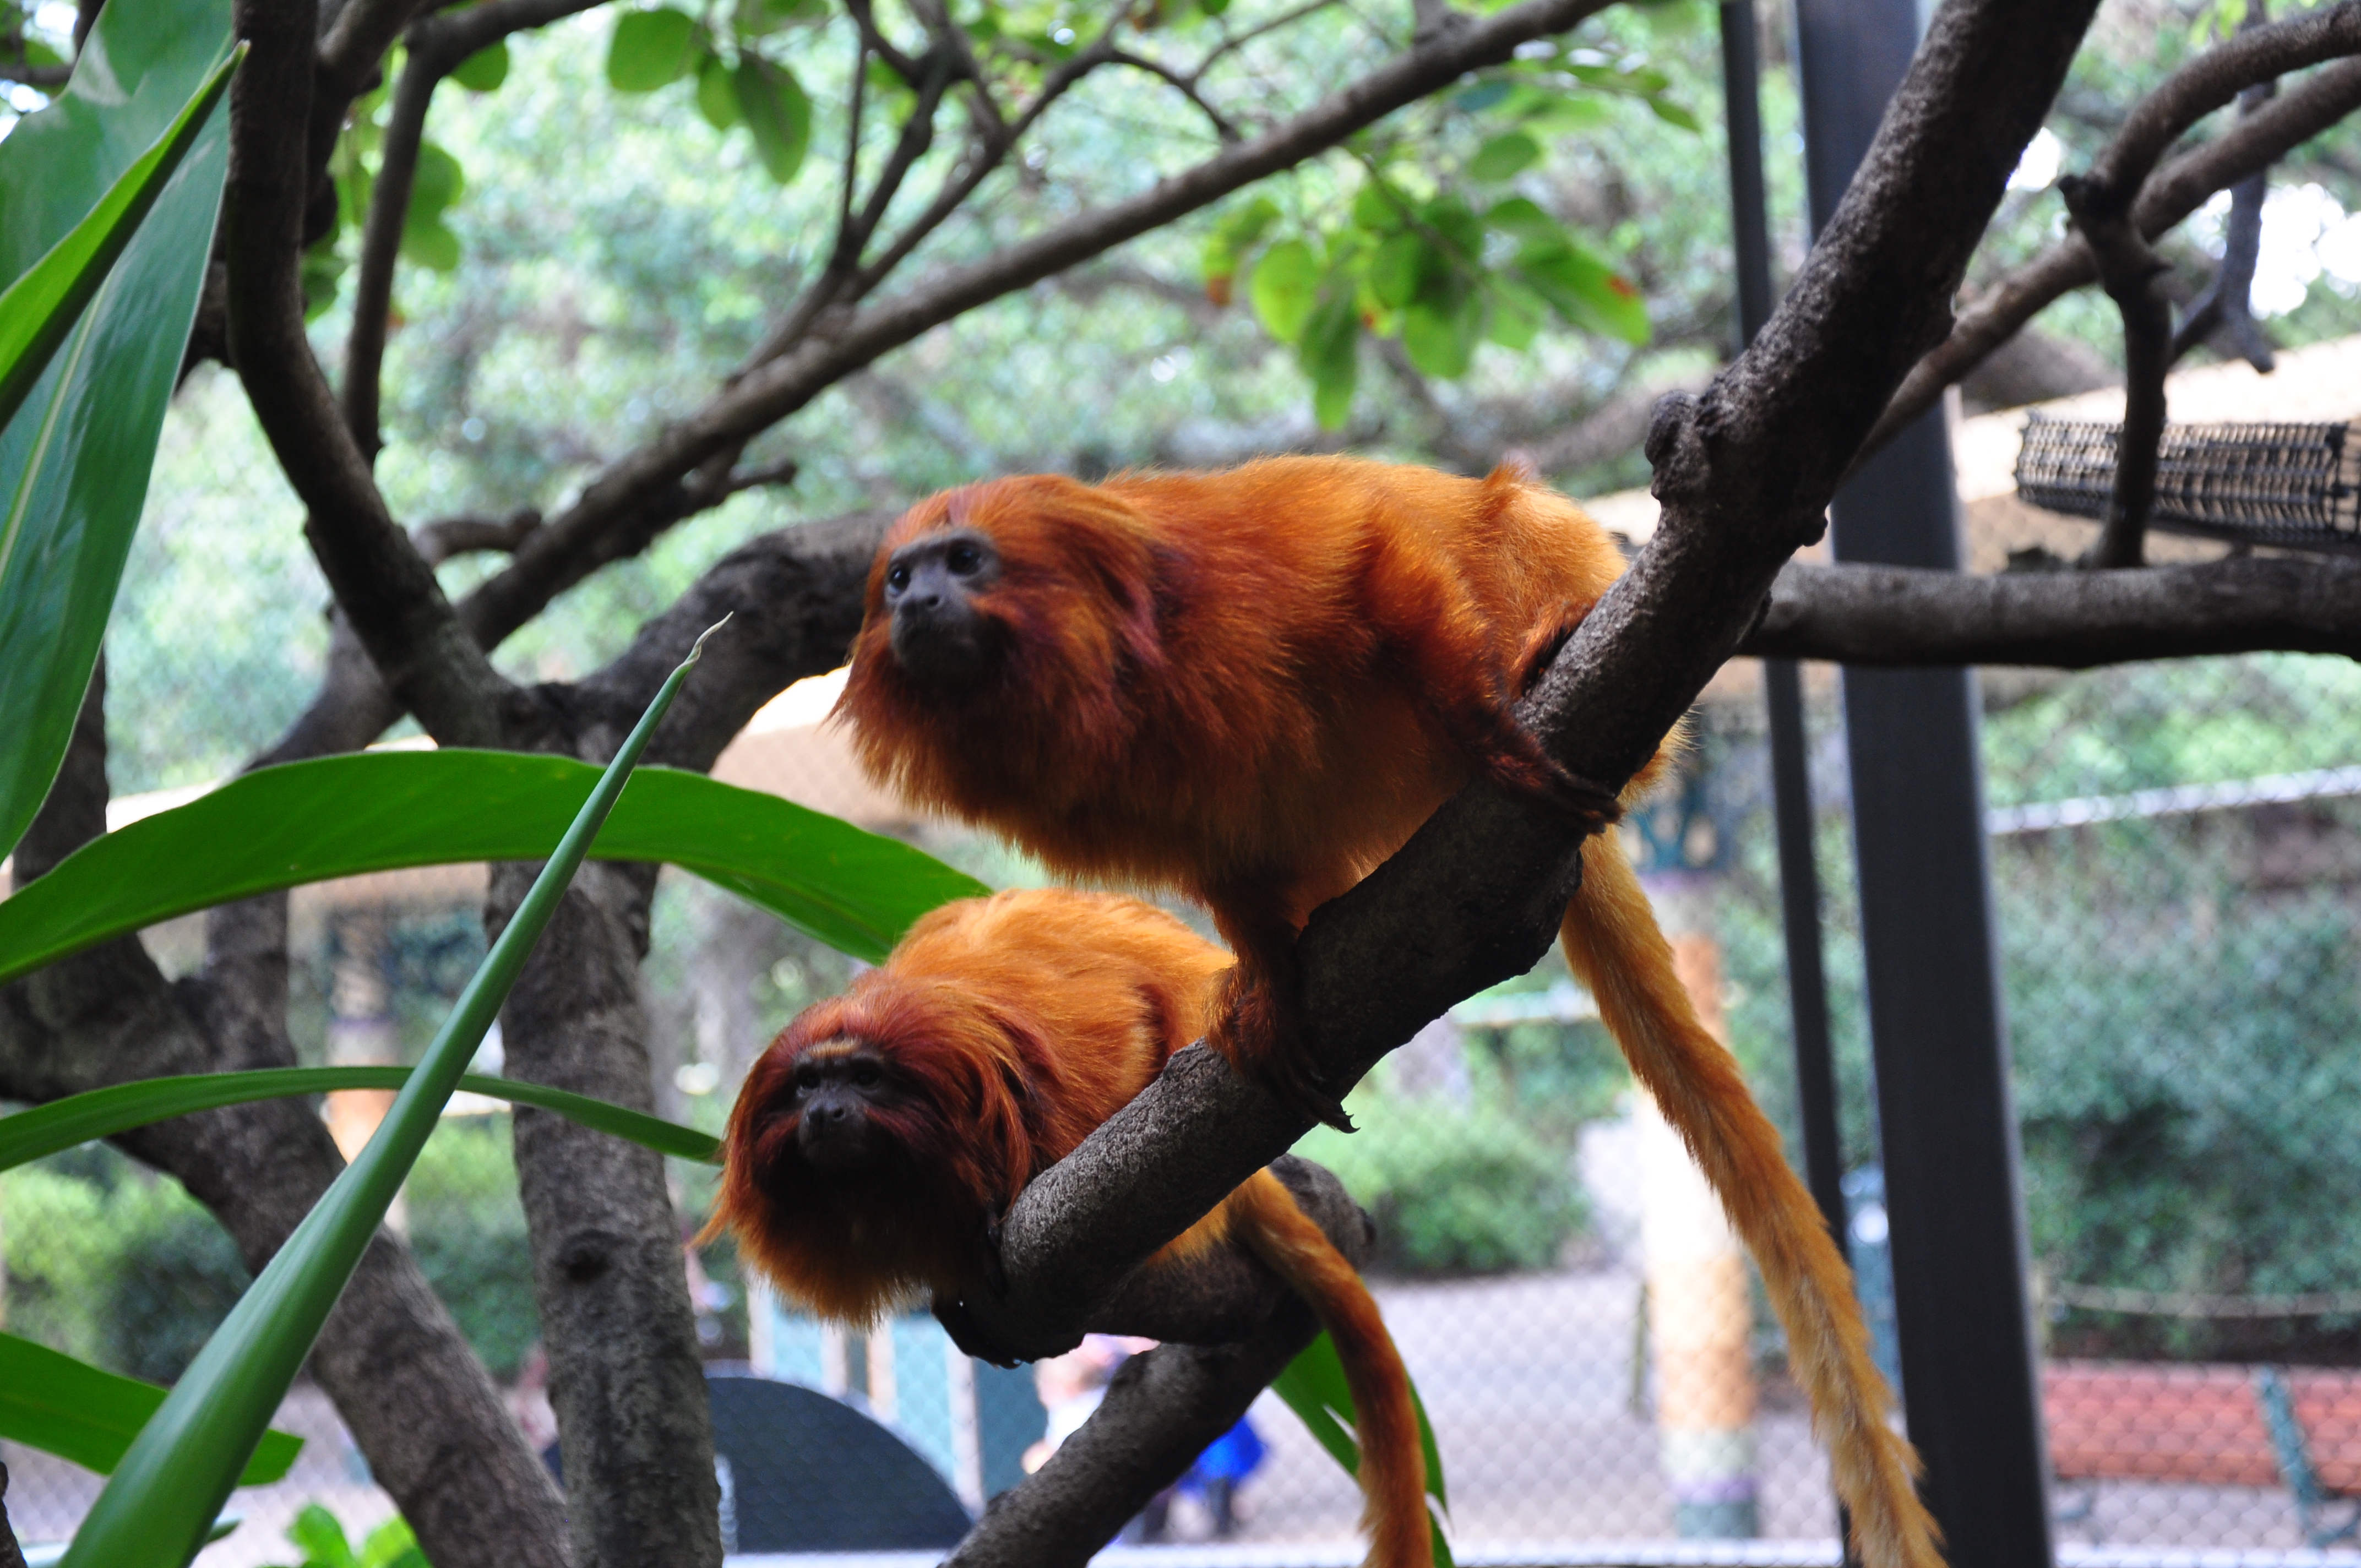 Where can I see the Golden Lion Tamarin in the wild